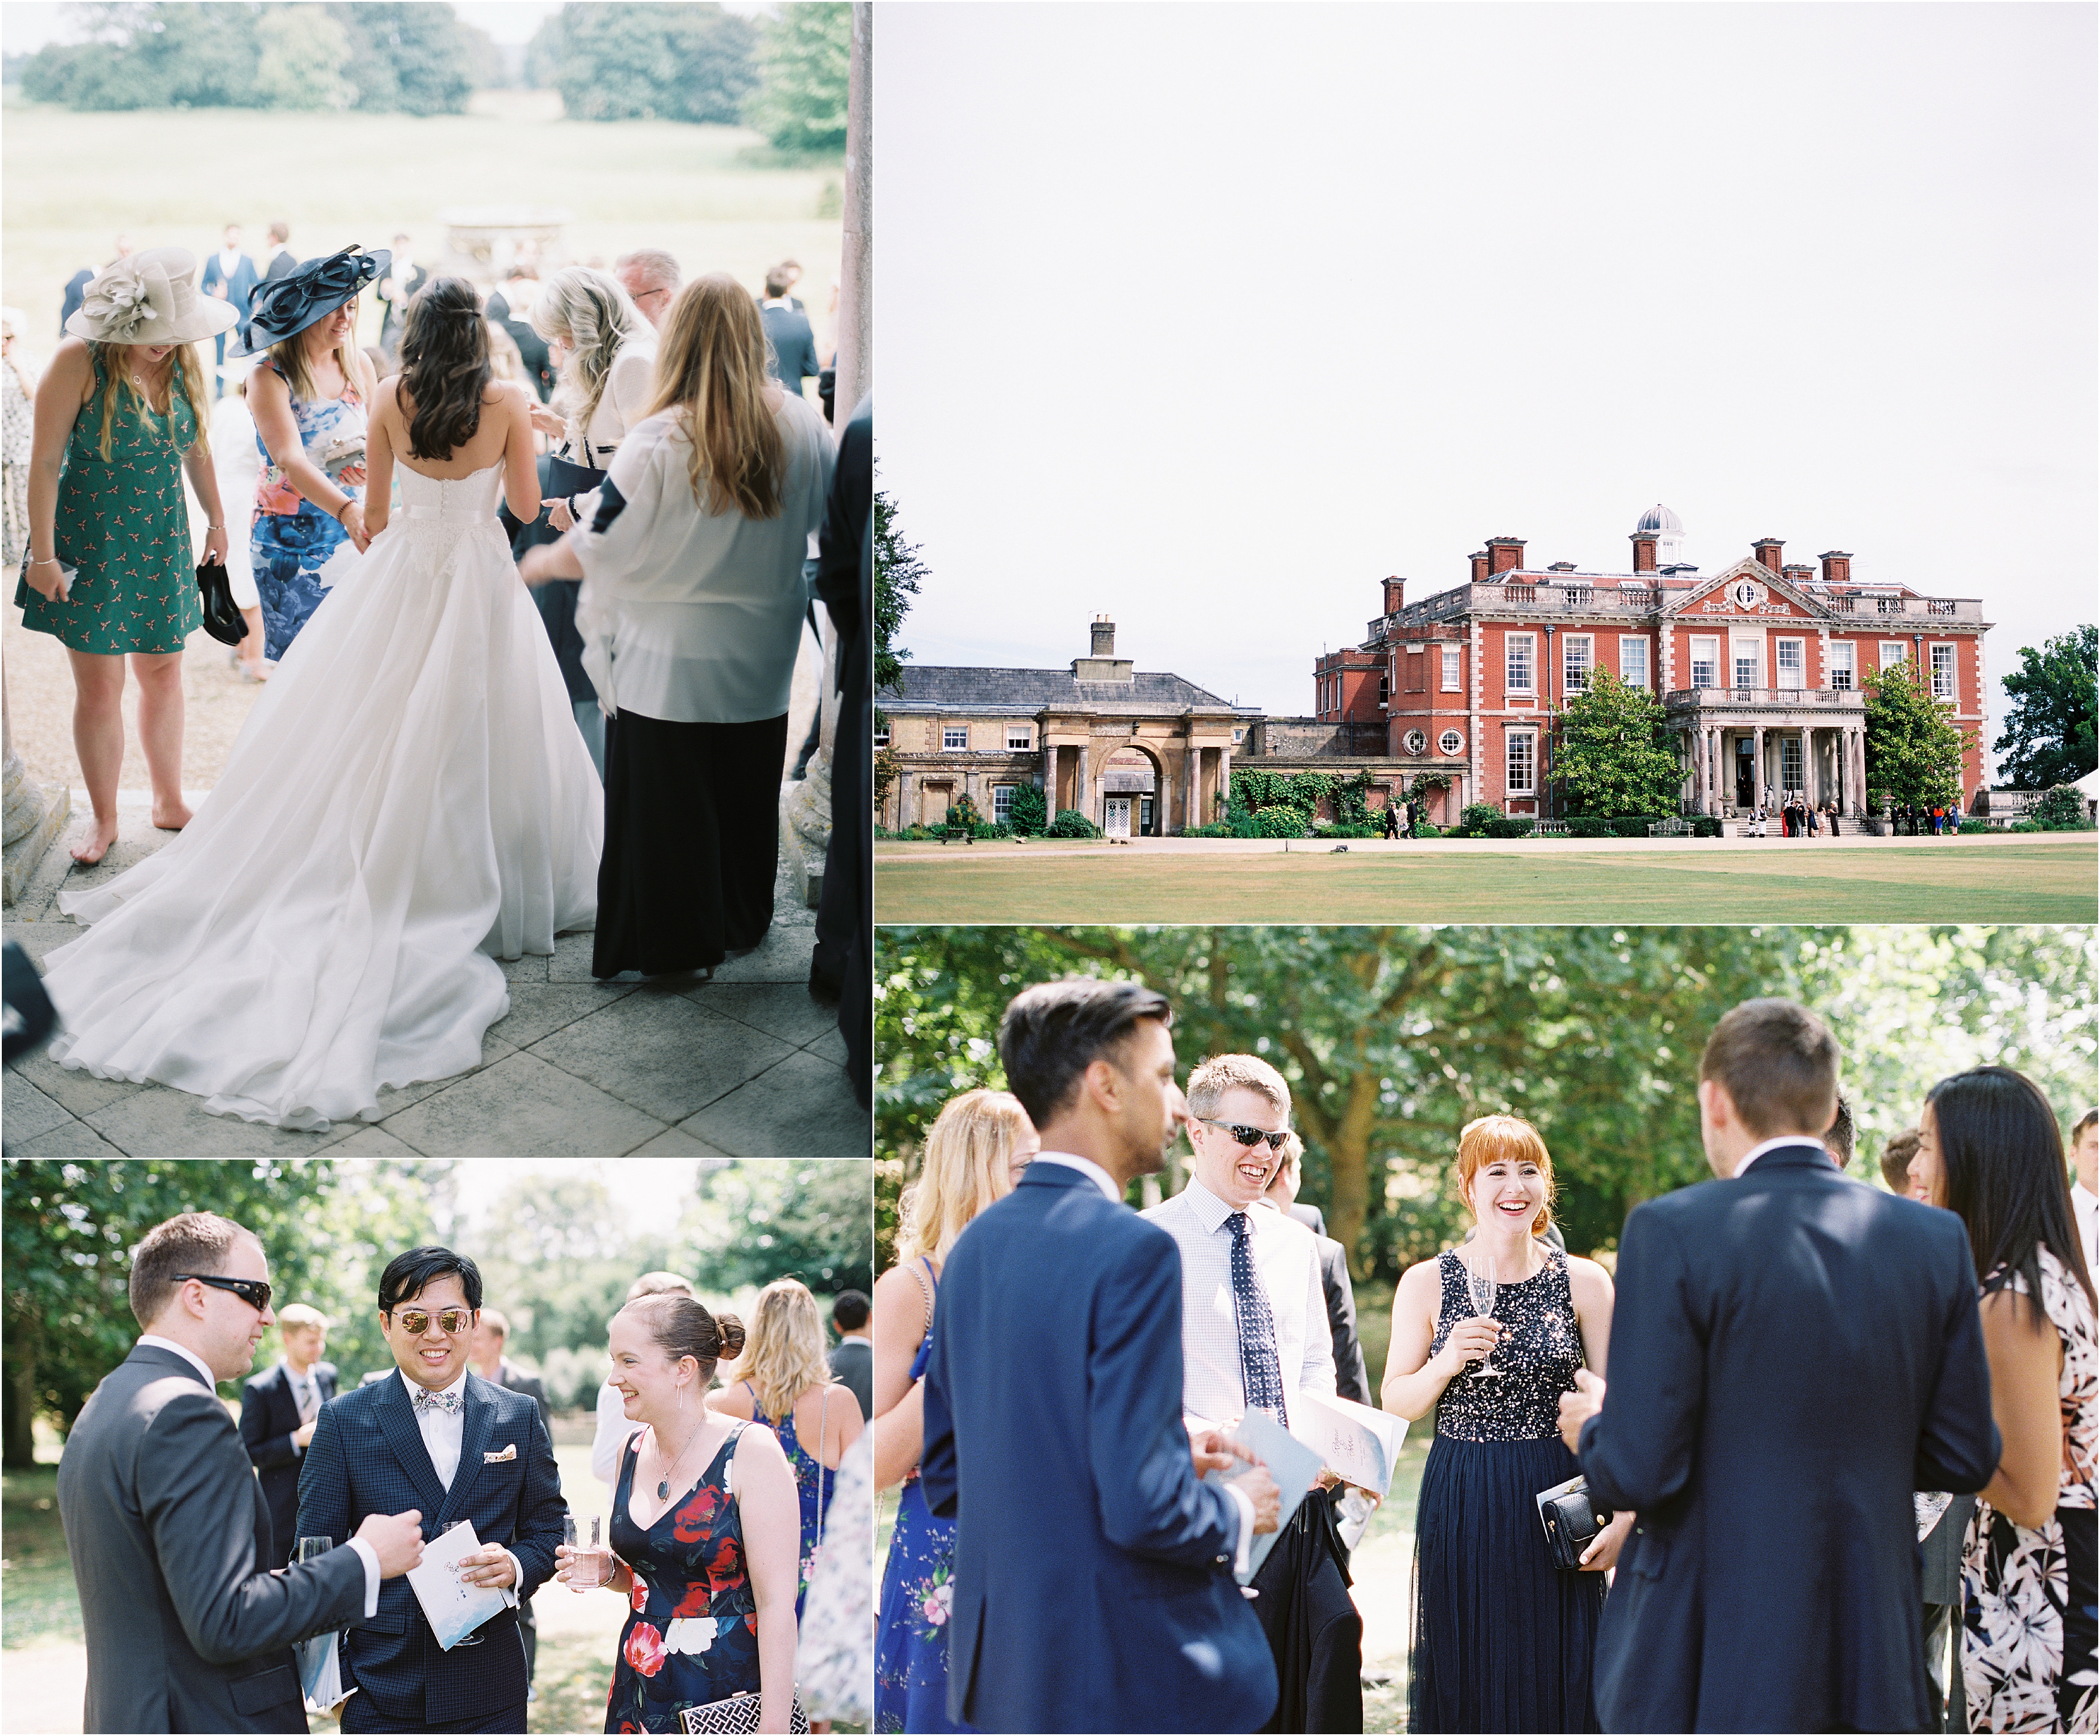 Wedding reception at Stansted House